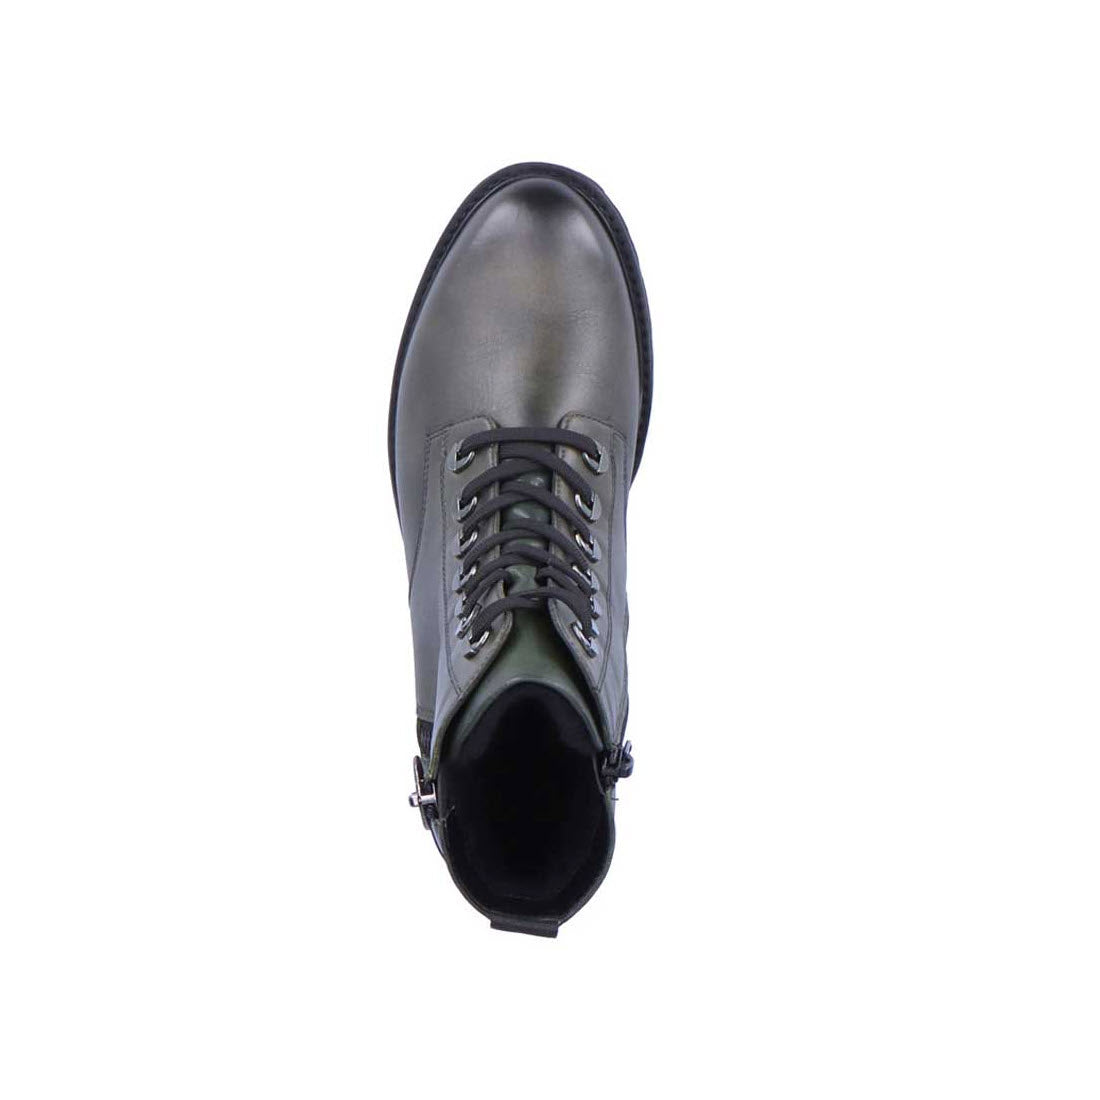 Top view of a single Remonte Tailored Combat Bootie in forest green, with laces, isolated on a white background.